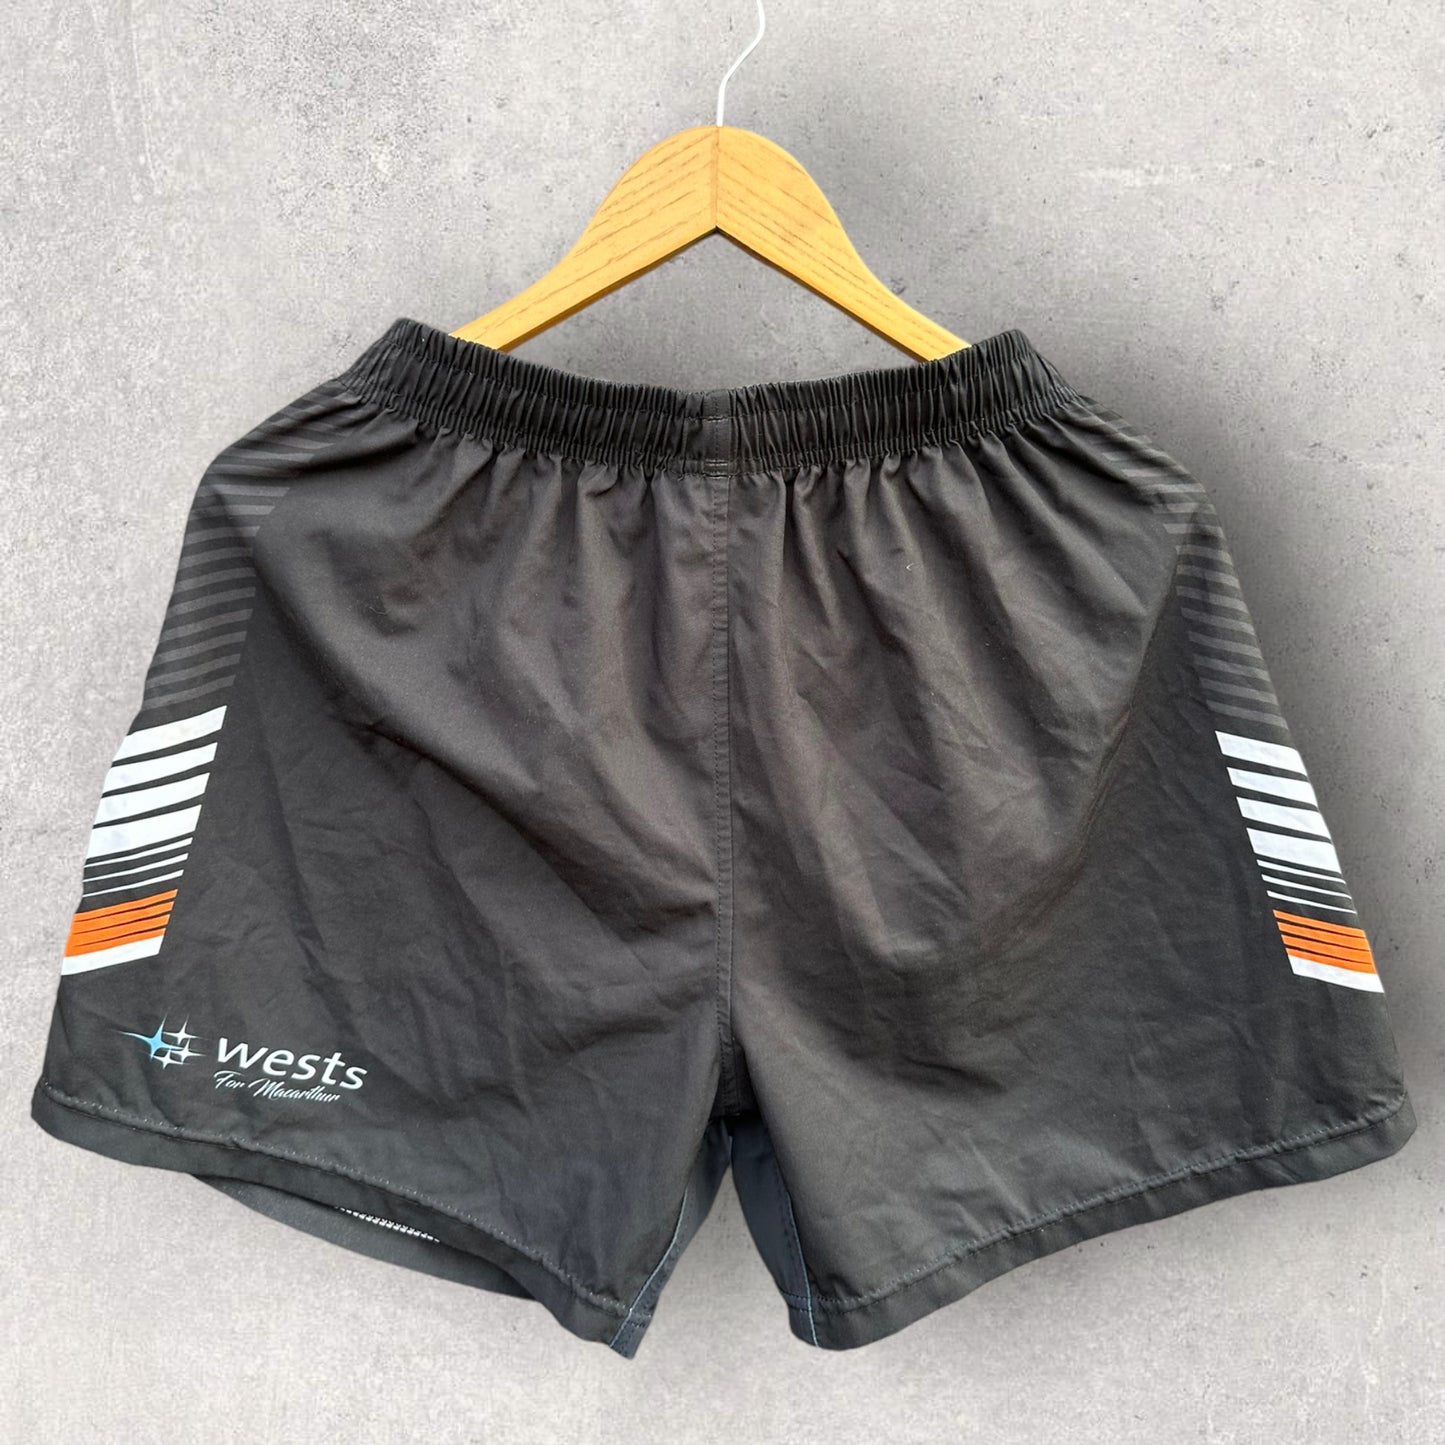 WESTS TIGERS NSW RUGBY LEAGUE TRAINING SHORTS